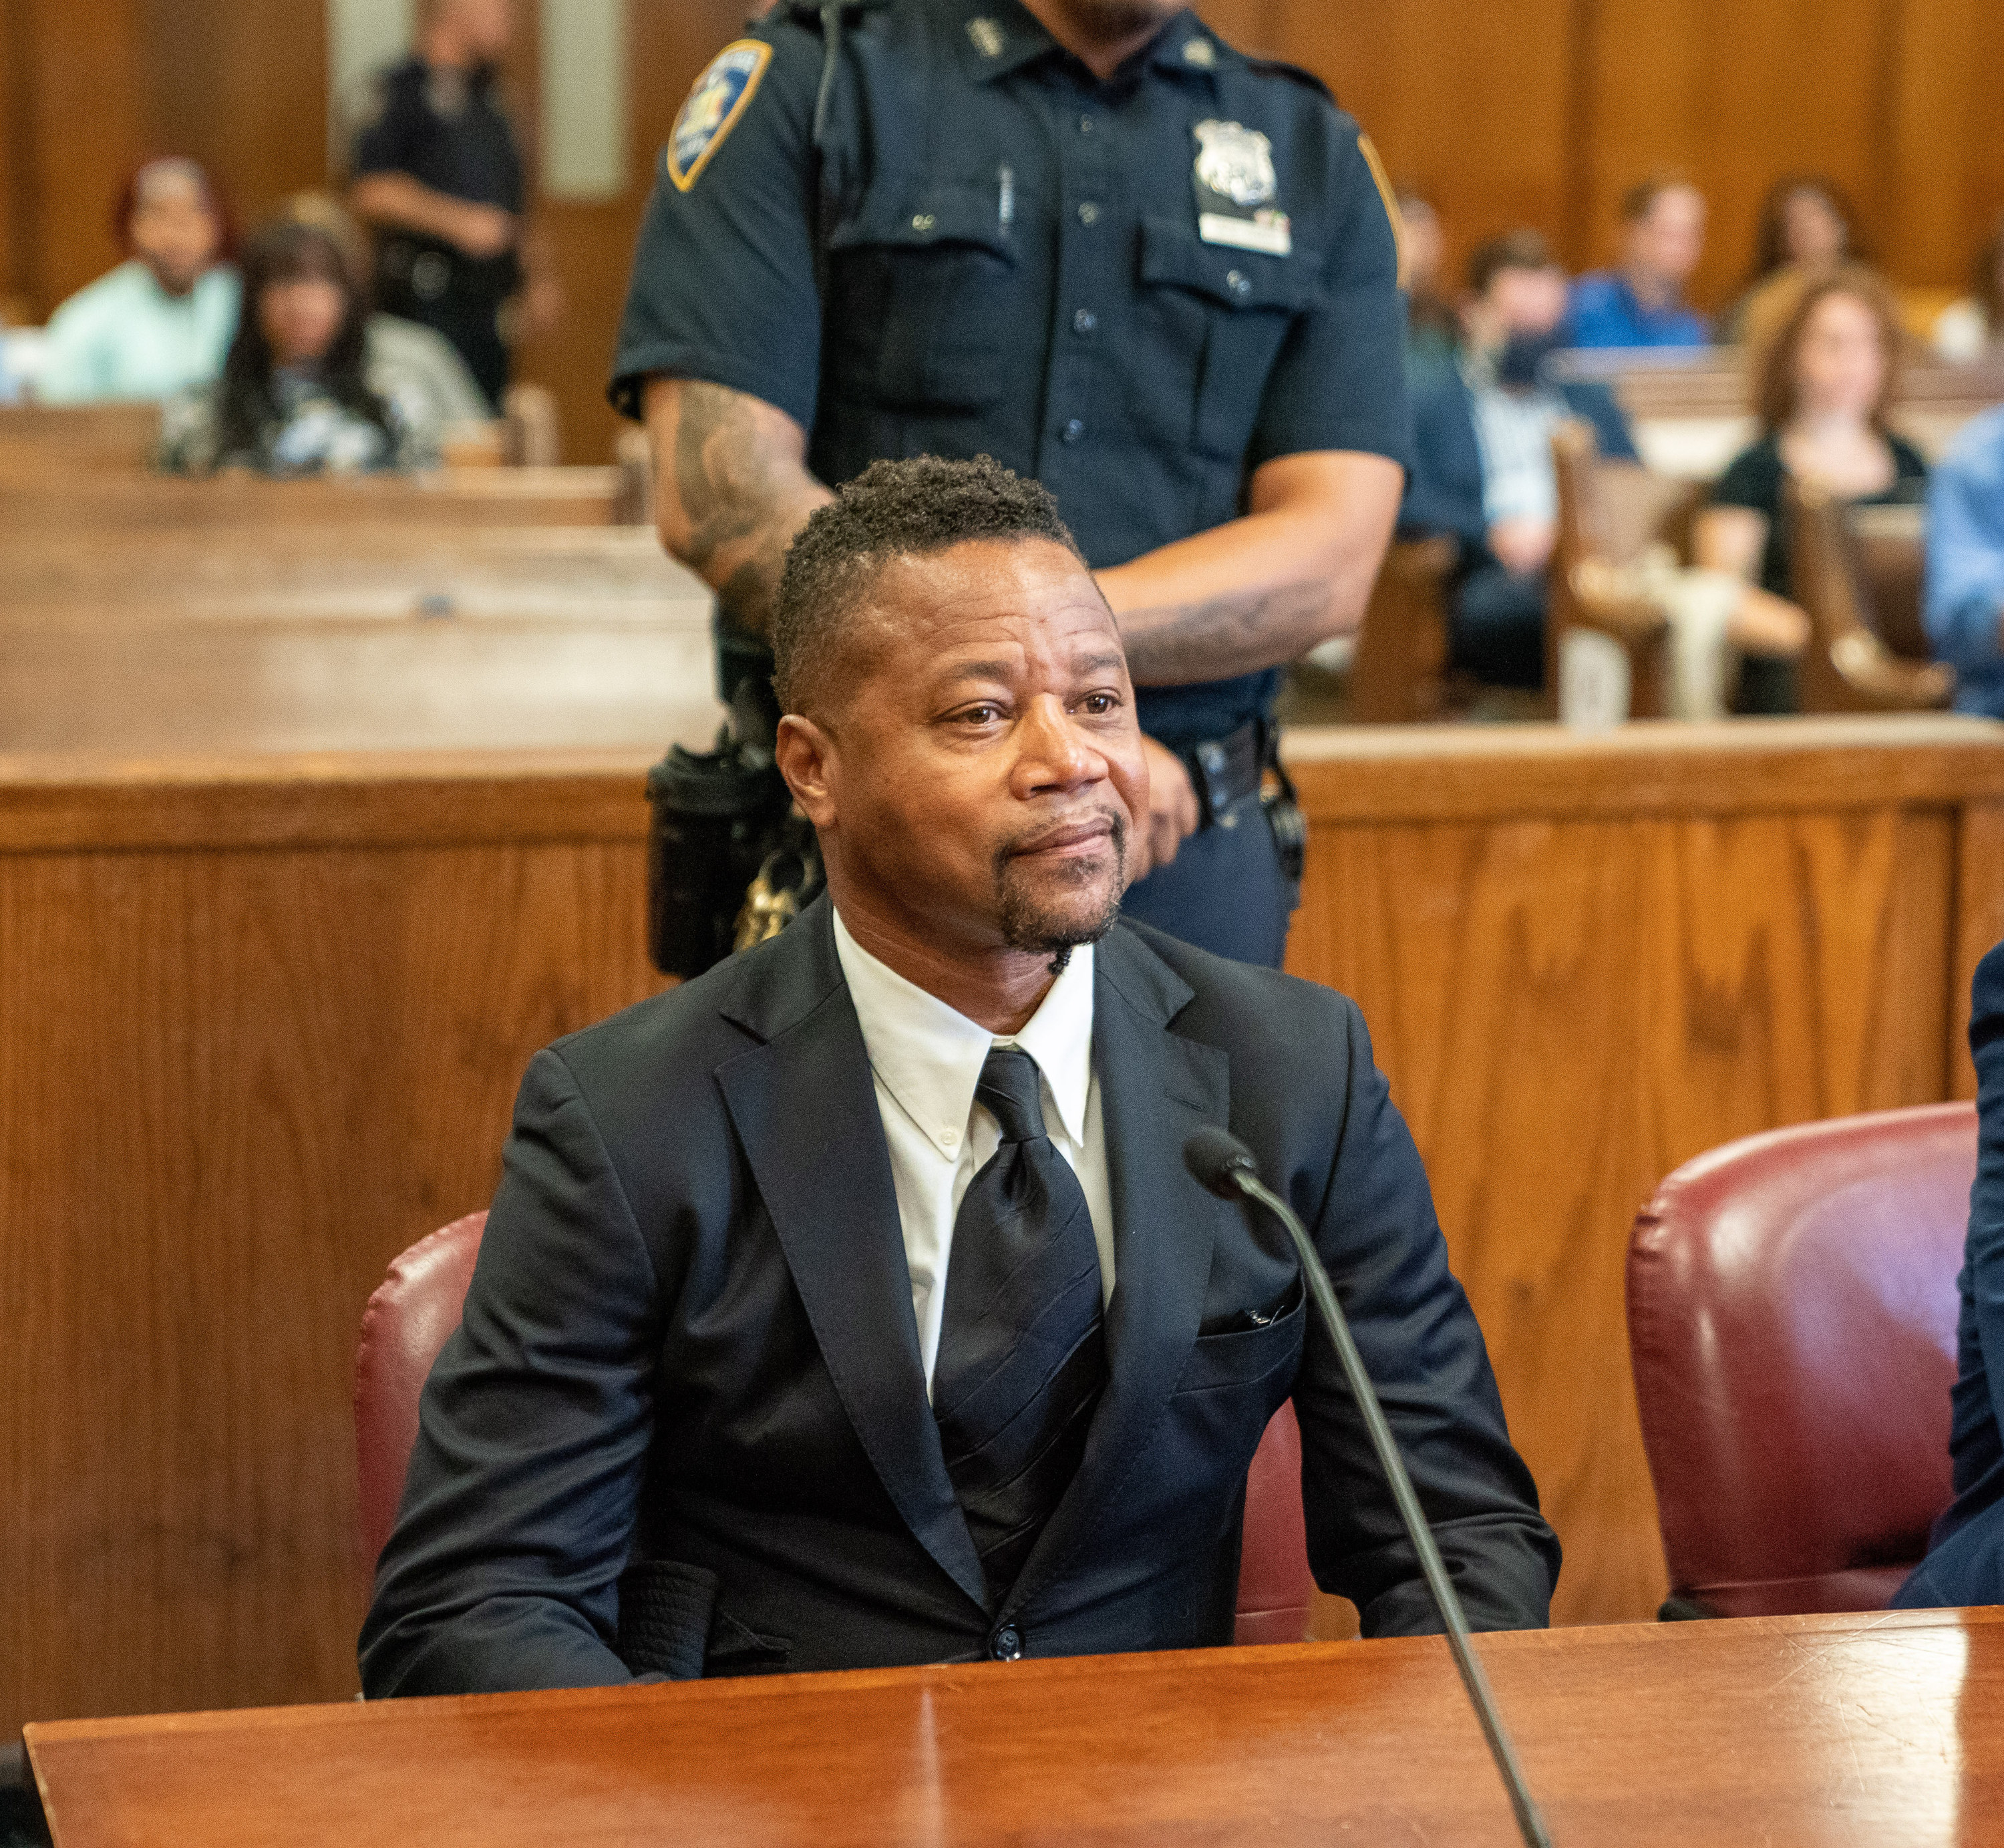 Actor Cuba Gooding Jr. appears at the Manhattan Supreme Criminal Court for his trial in New York, United States